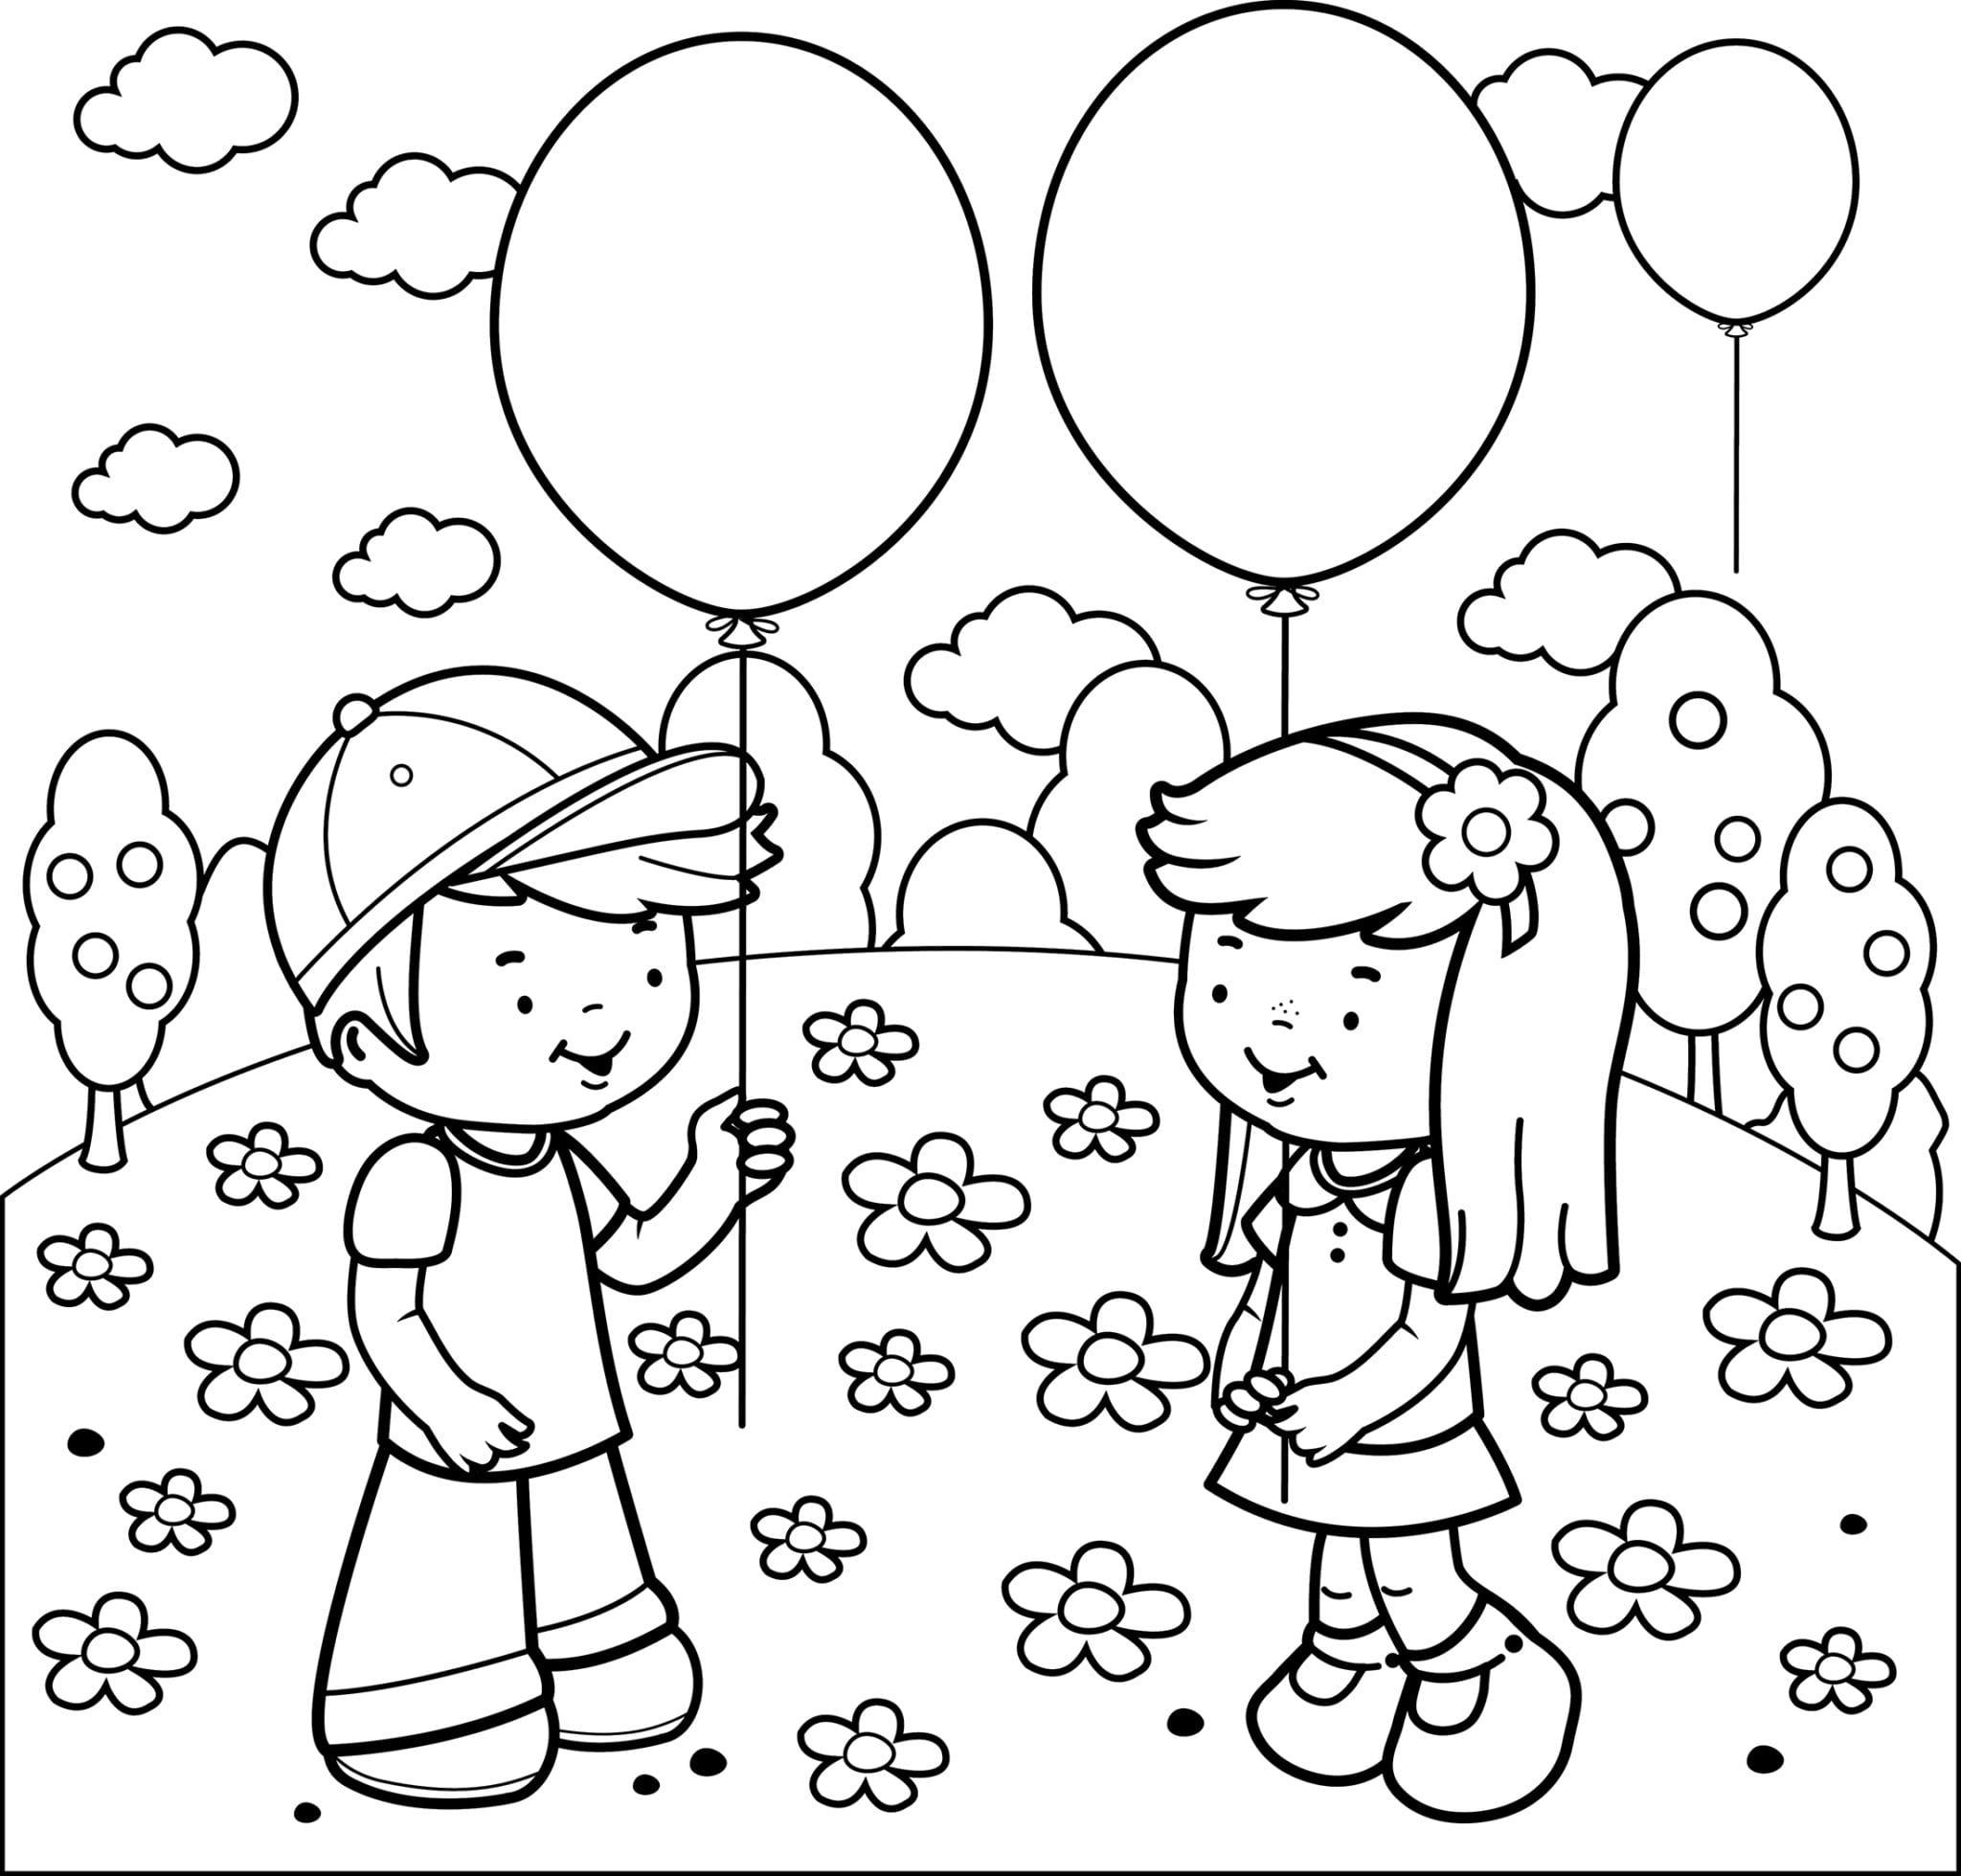 printable coloring page that shows two children holding balloons